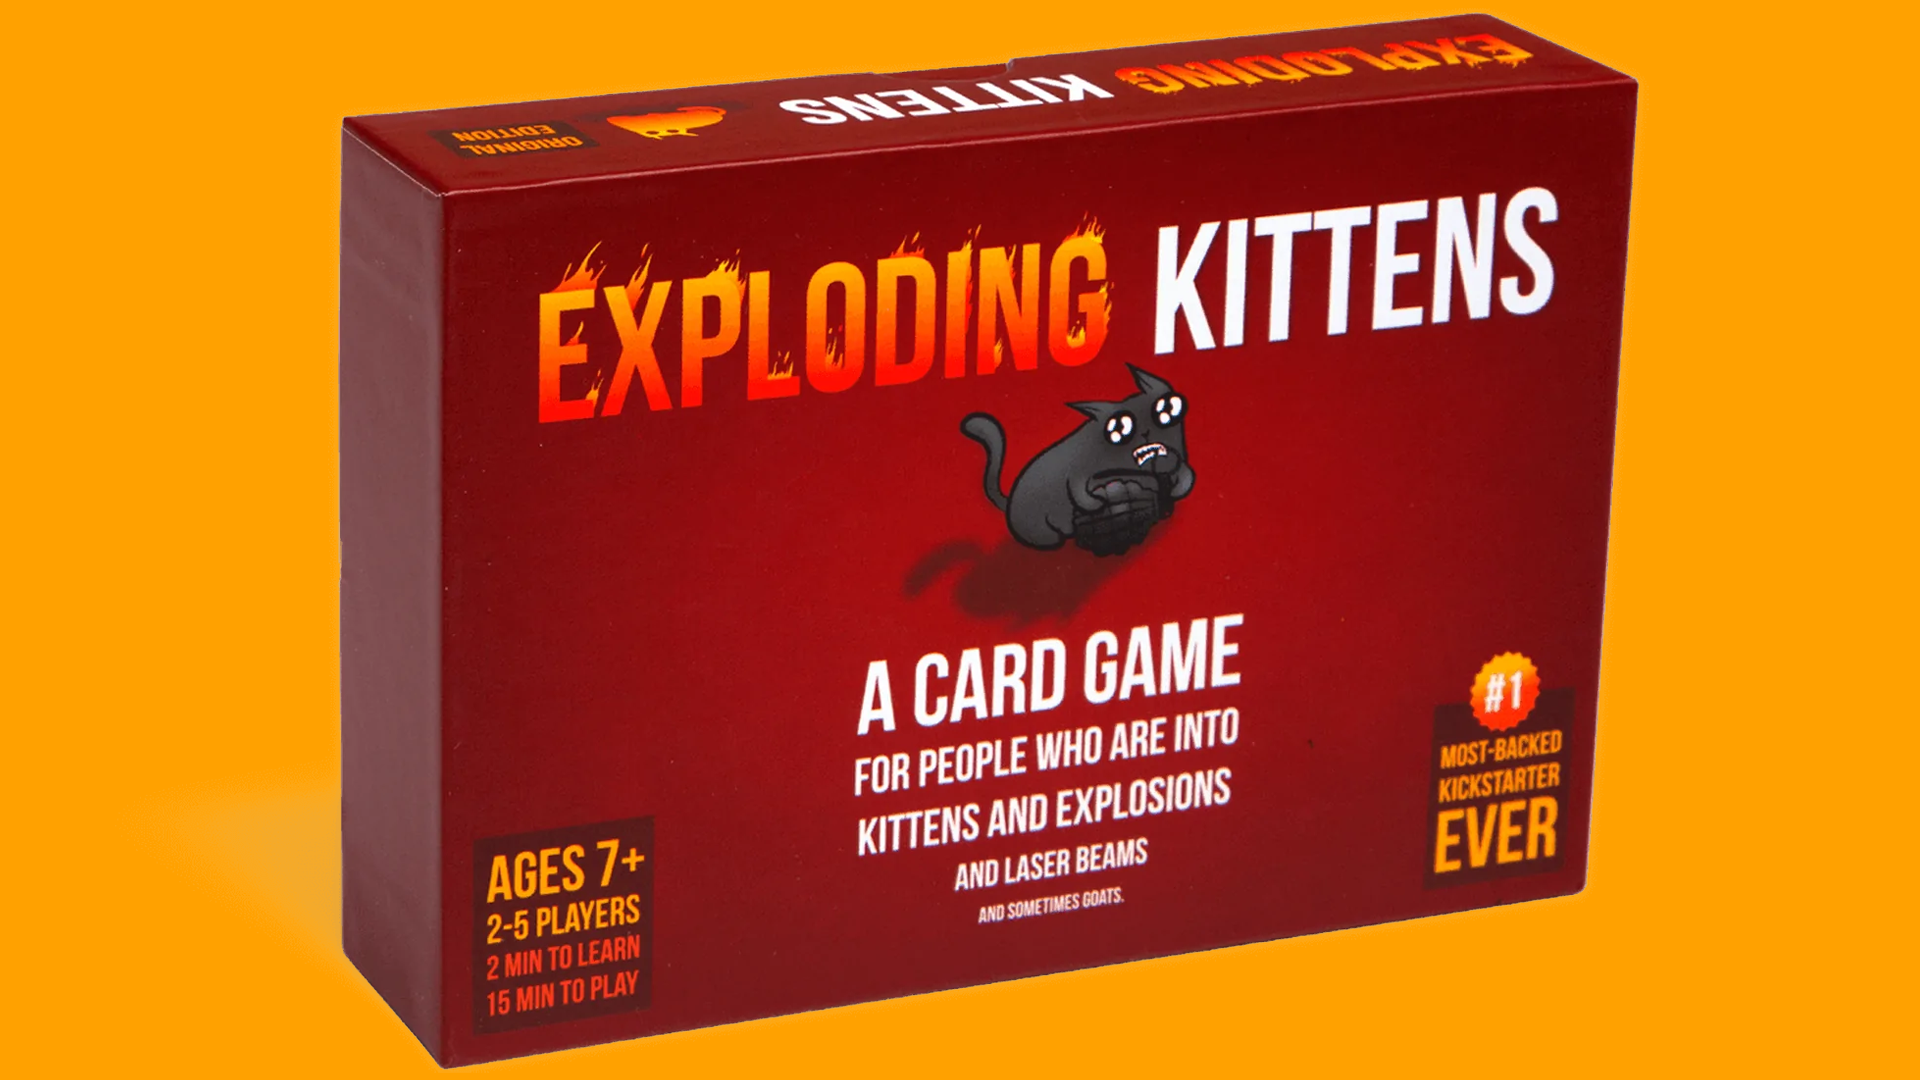 Image for How to play Exploding Kittens: rules, setup and how to win explained